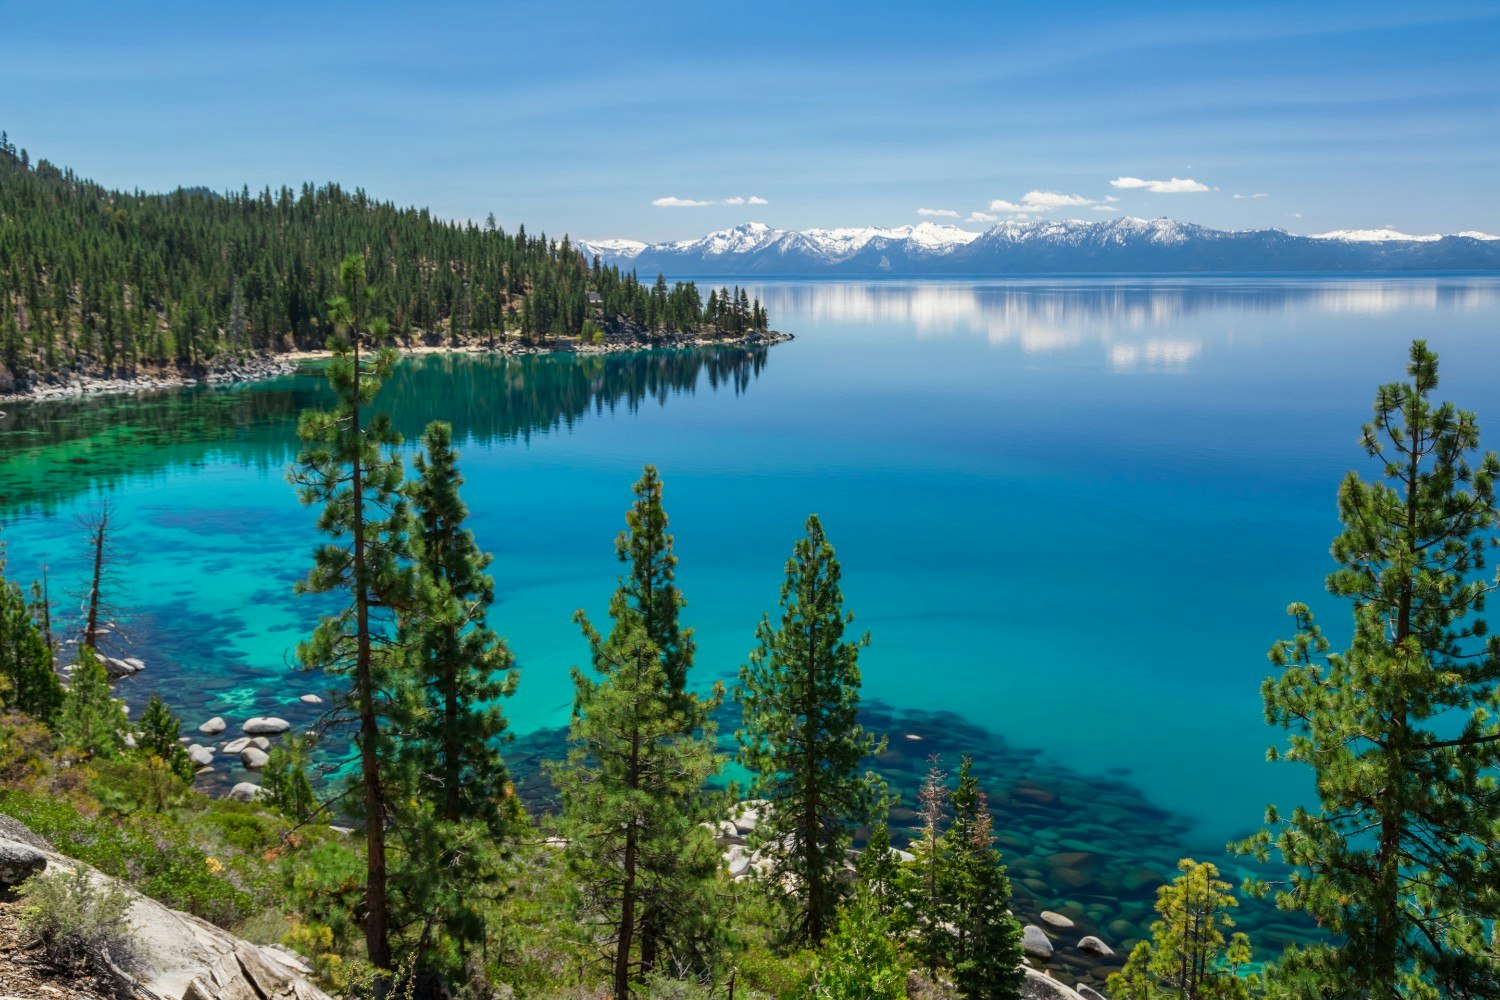 Lake Tahoe in the US